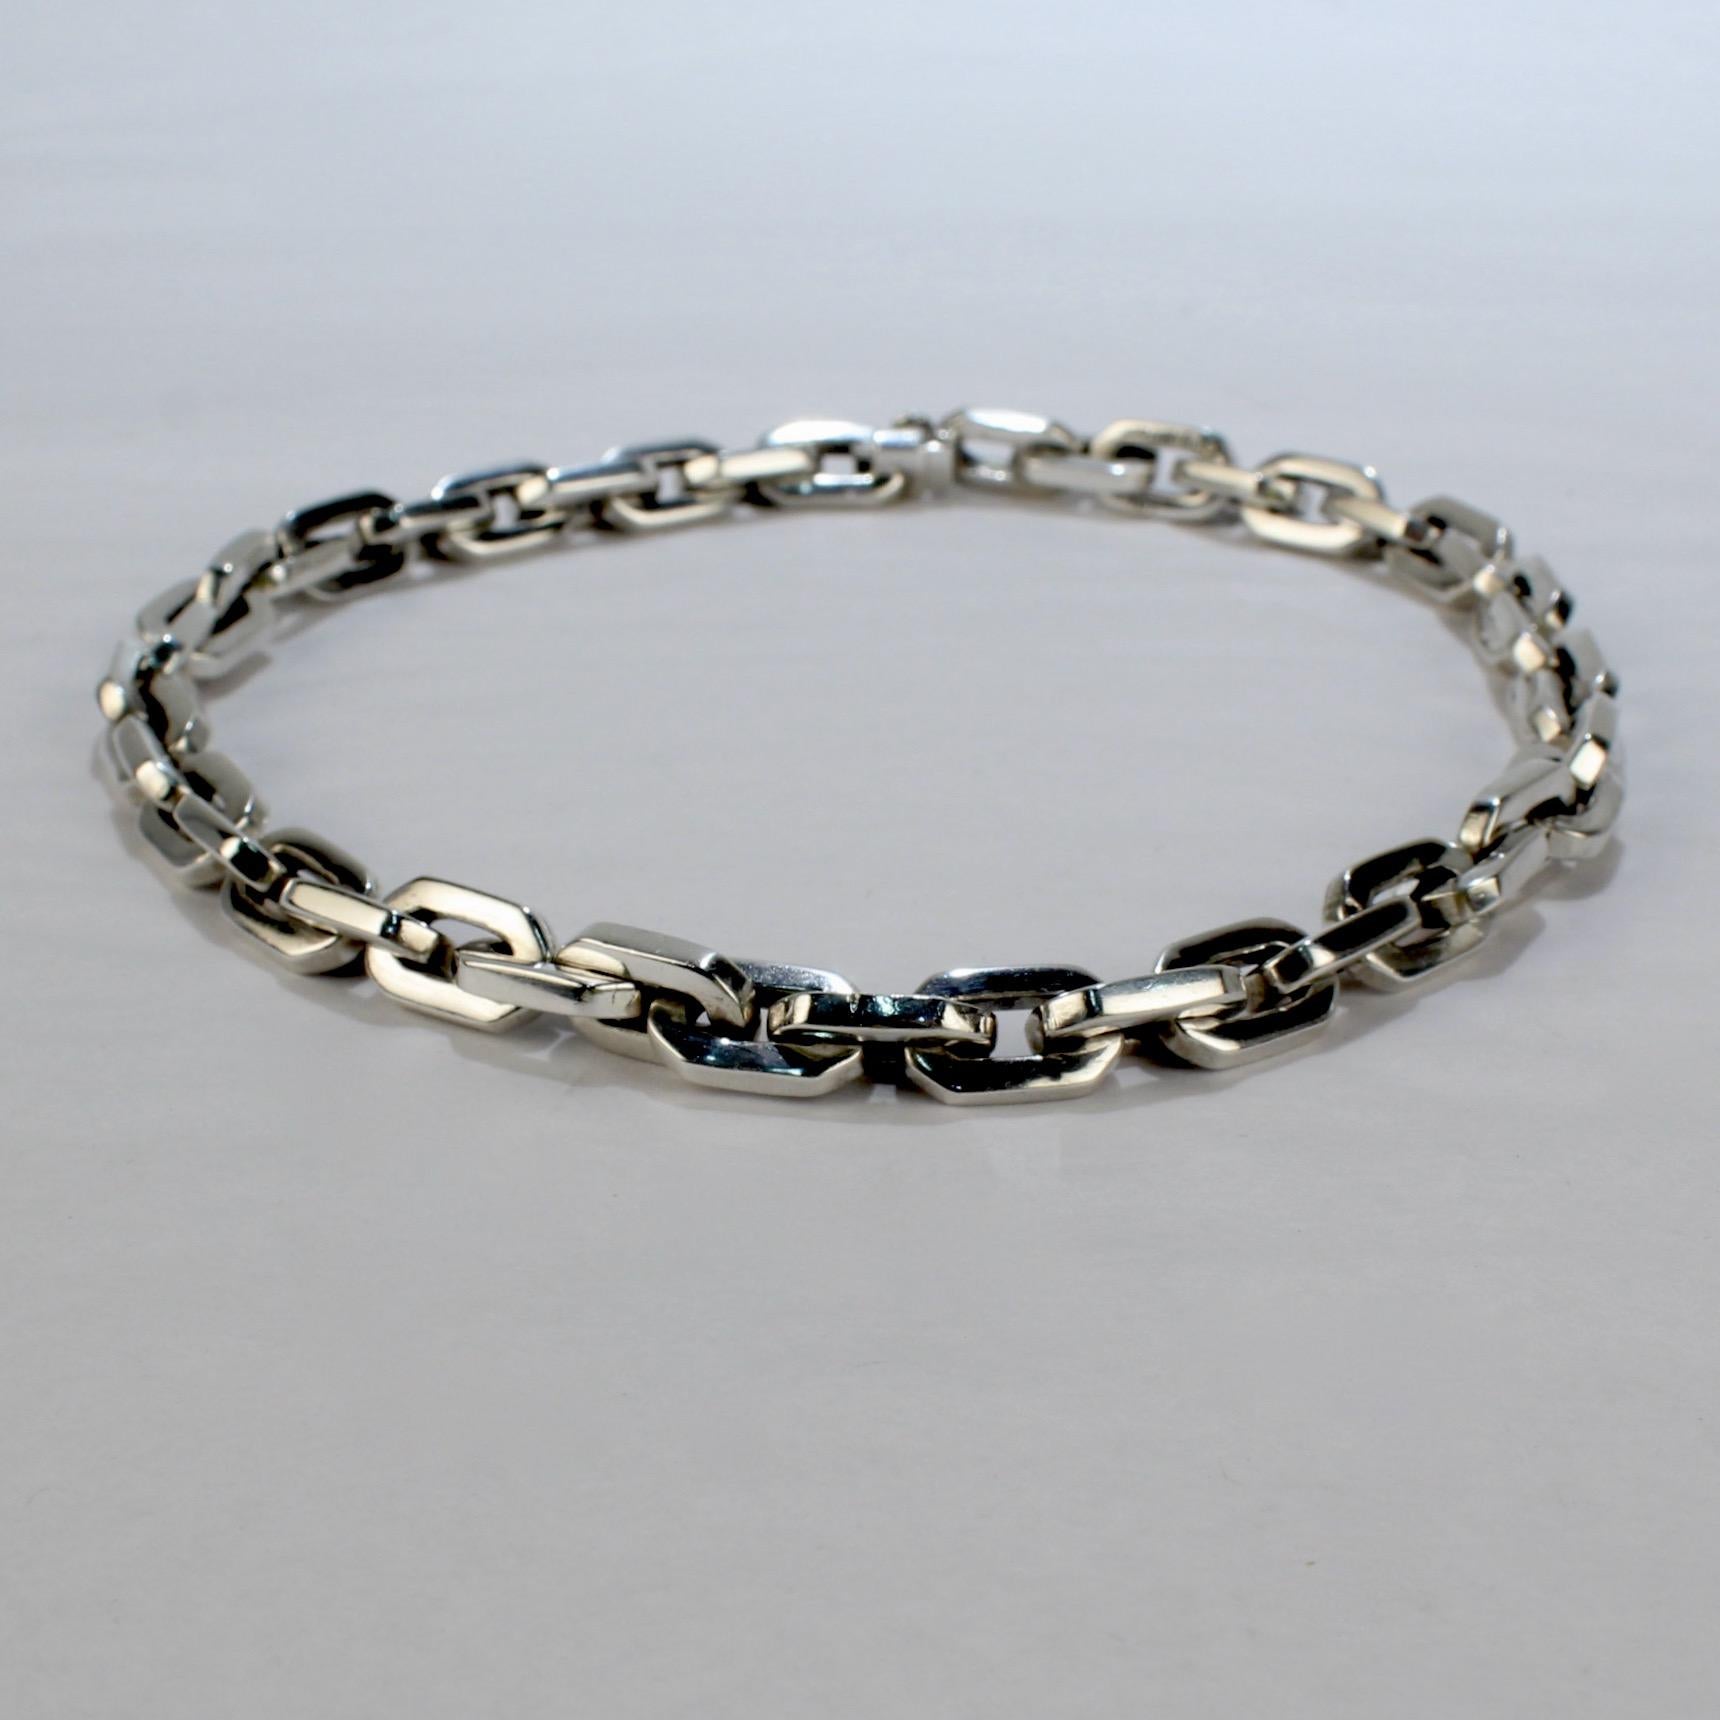 A fine Mexican sterling silver choker length necklace.

With elongated, hexagonal cable or dog chain links.

Simply a great necklace!

Date:
Mid-20th Century

Overall Condition:
It is in overall good, as-pictured, used estate condition with some